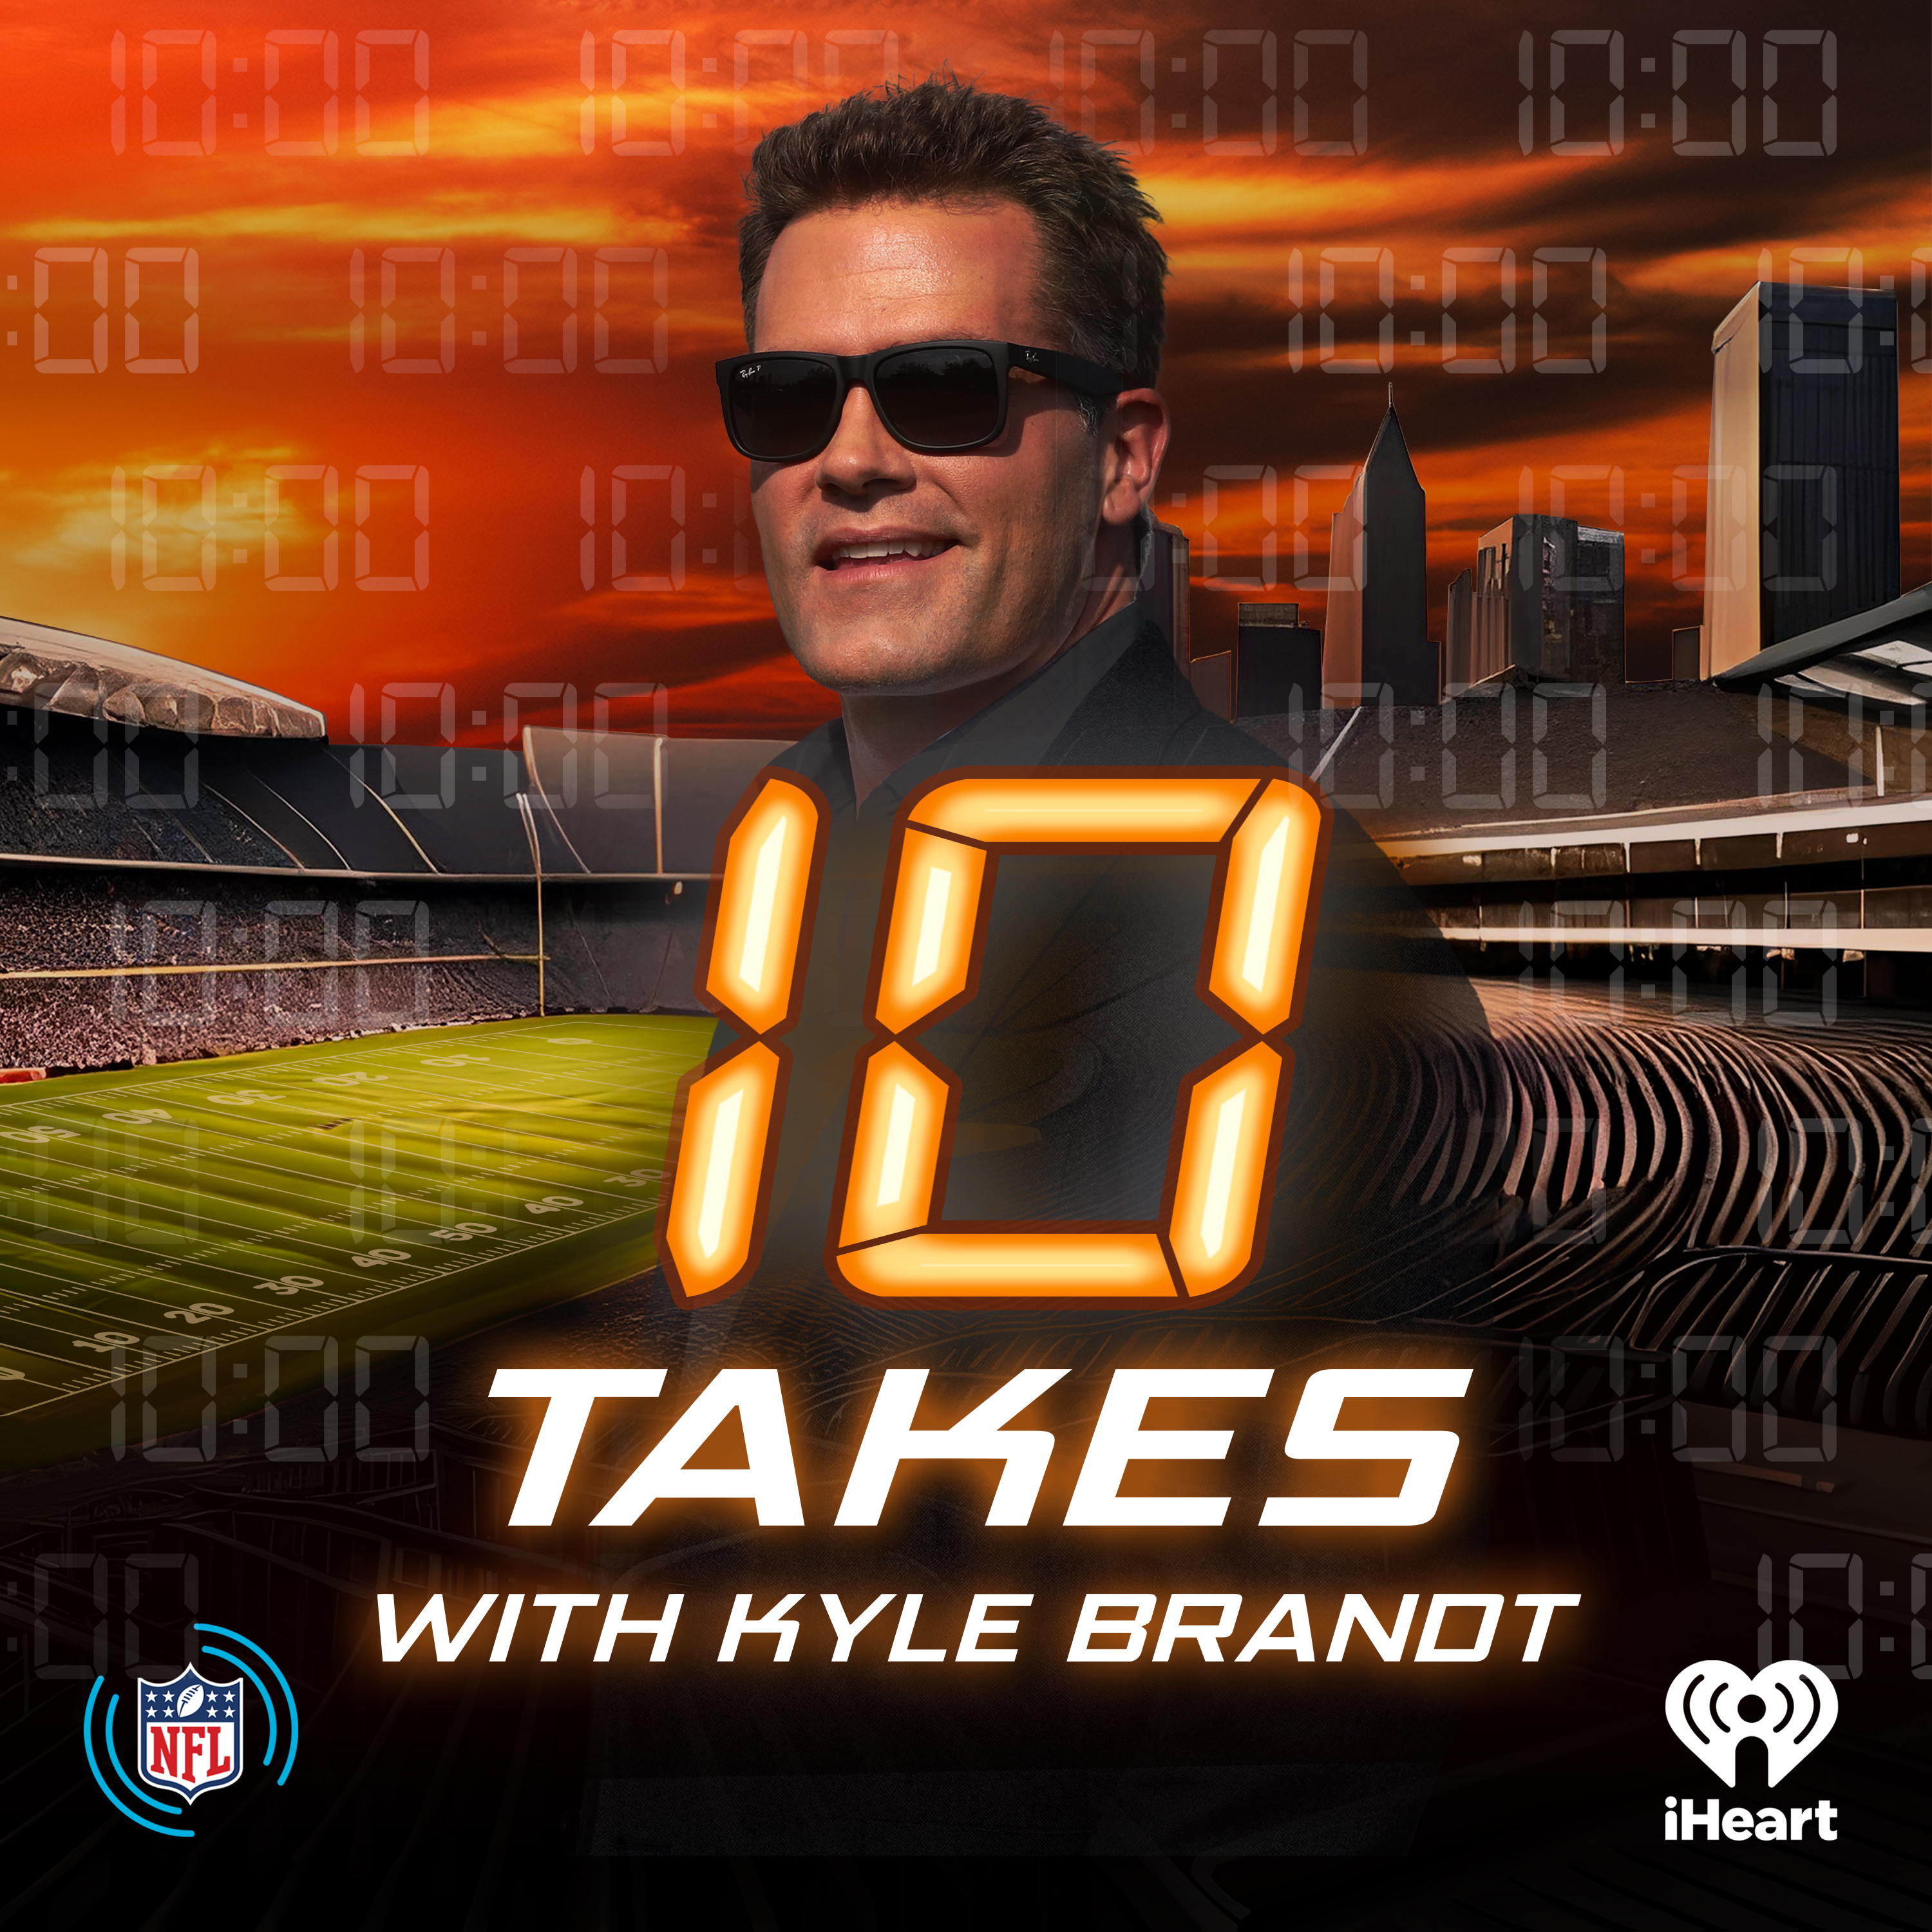 Introducing: 10 Takes with Kyle Brandt